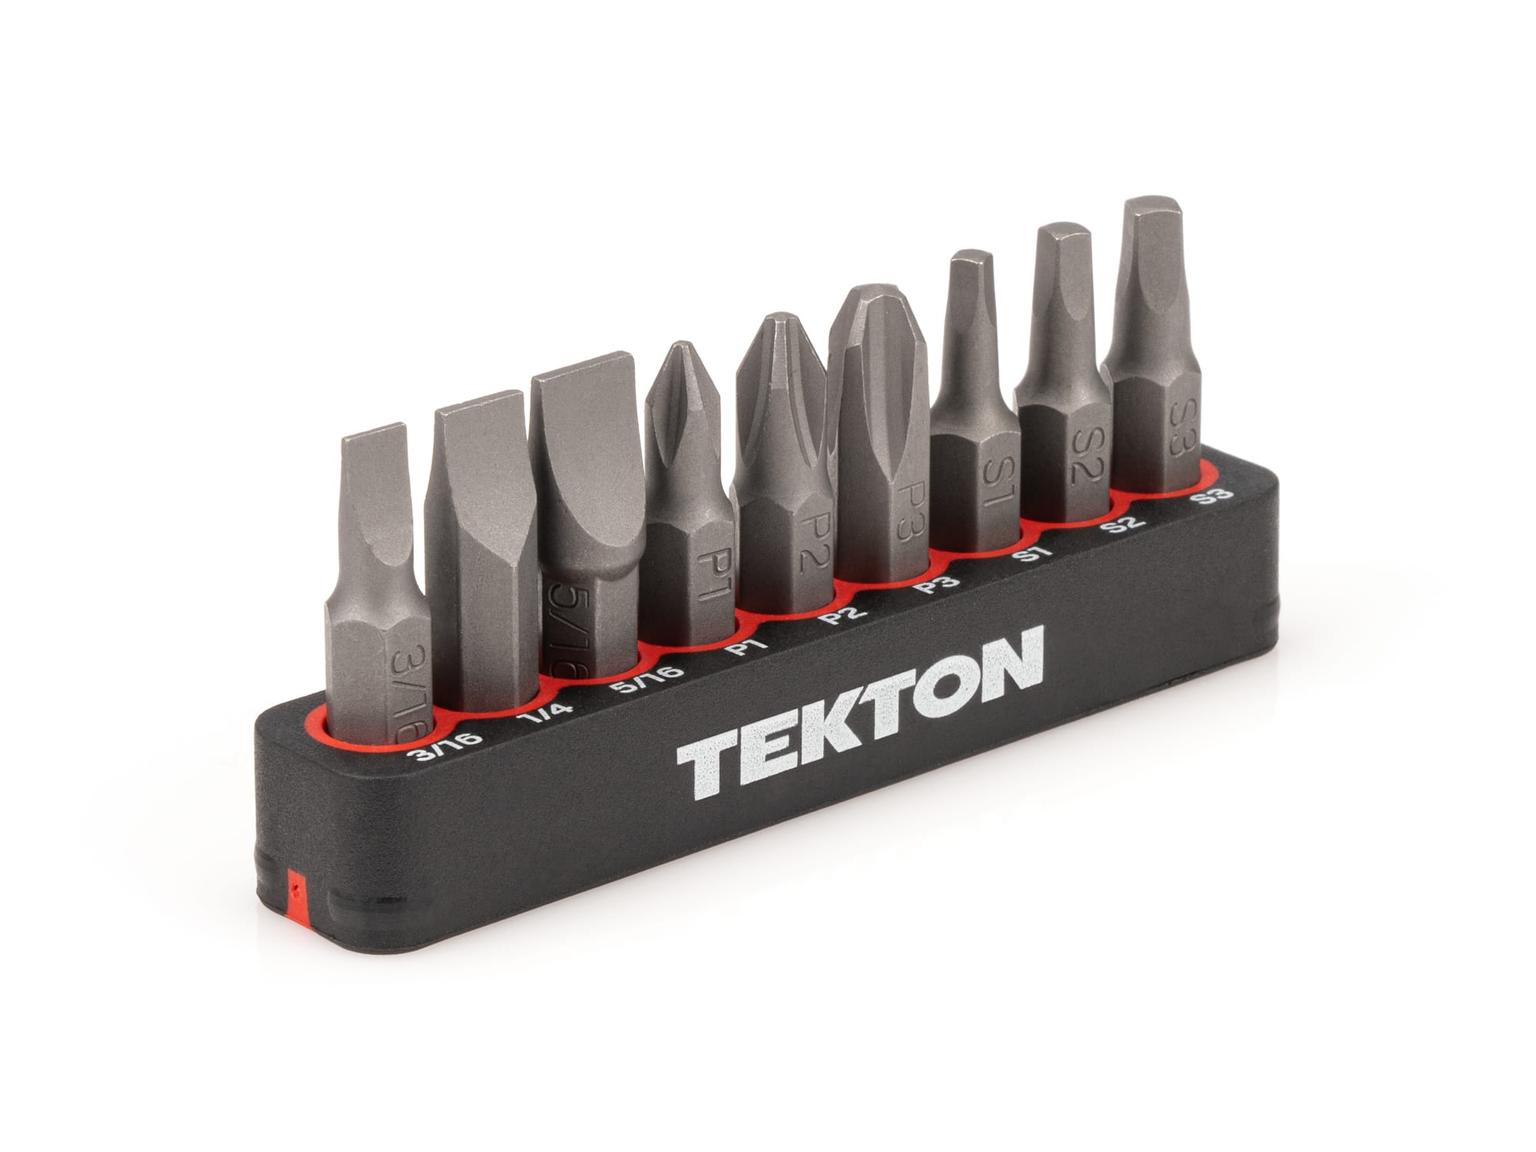 TEKTON DZZ93001-T 1/4 Inch Phillips, Slotted, Square Bit Set with Rail, 9-Piece (#1-#3, 3/16-5/16 in., S1-S3)